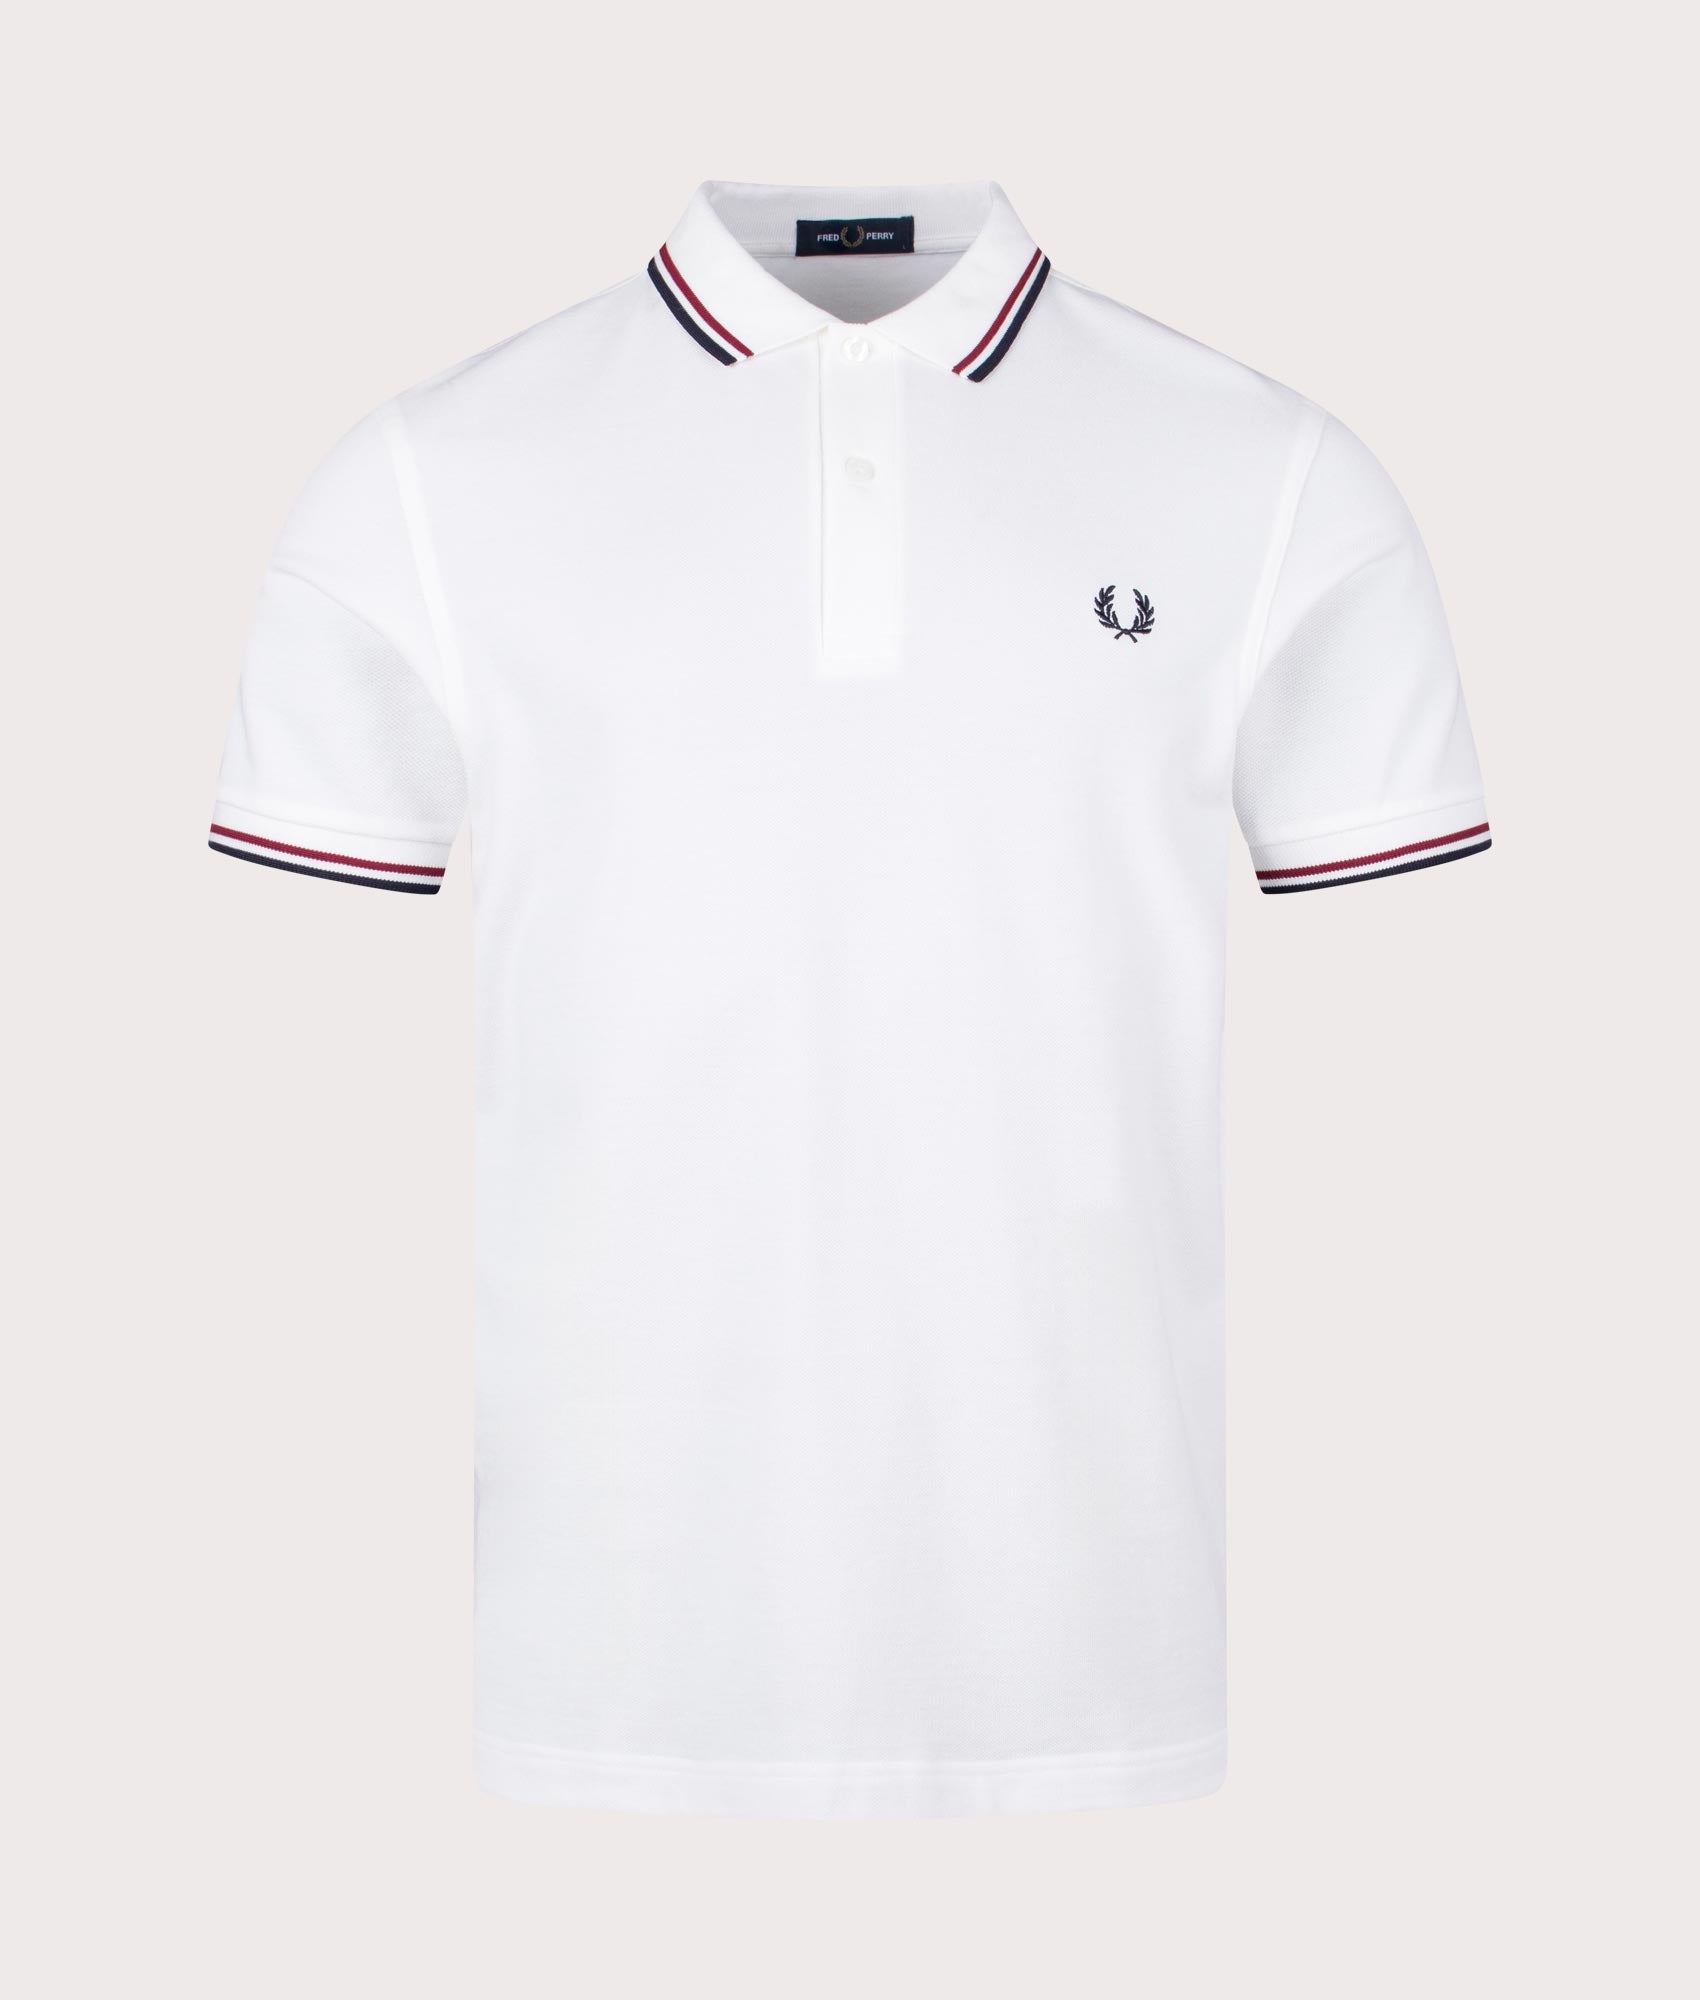 Twin Tipped Fred Perry Polo Shirt White-Brick | Fred Perry | EQVVS